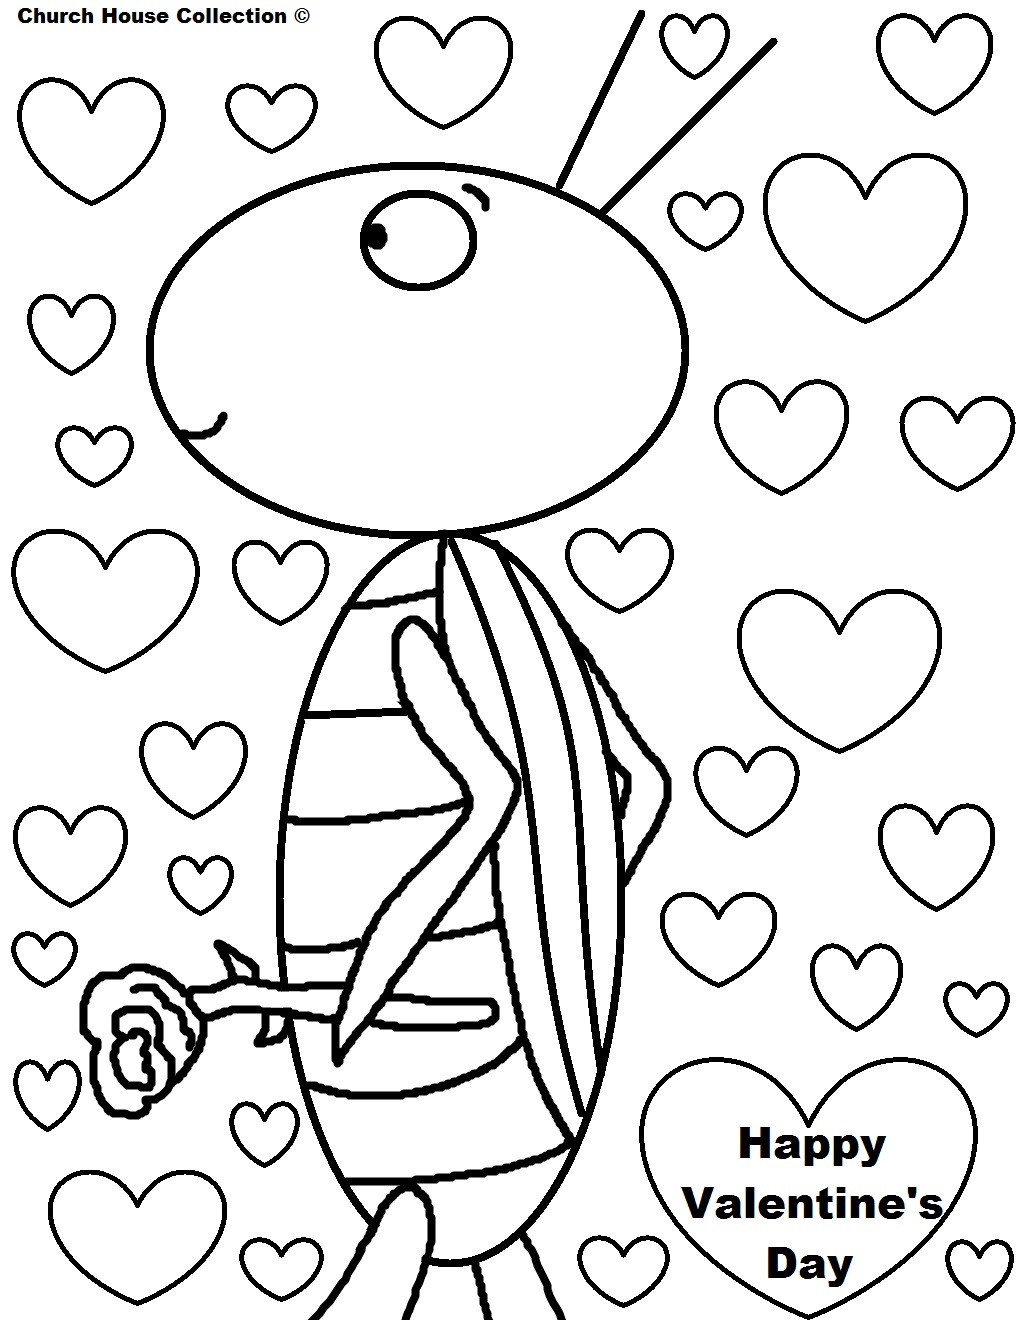 Valentines Day Coloring Pages Printable
 Church House Collection Blog Valentine s Day Coloring